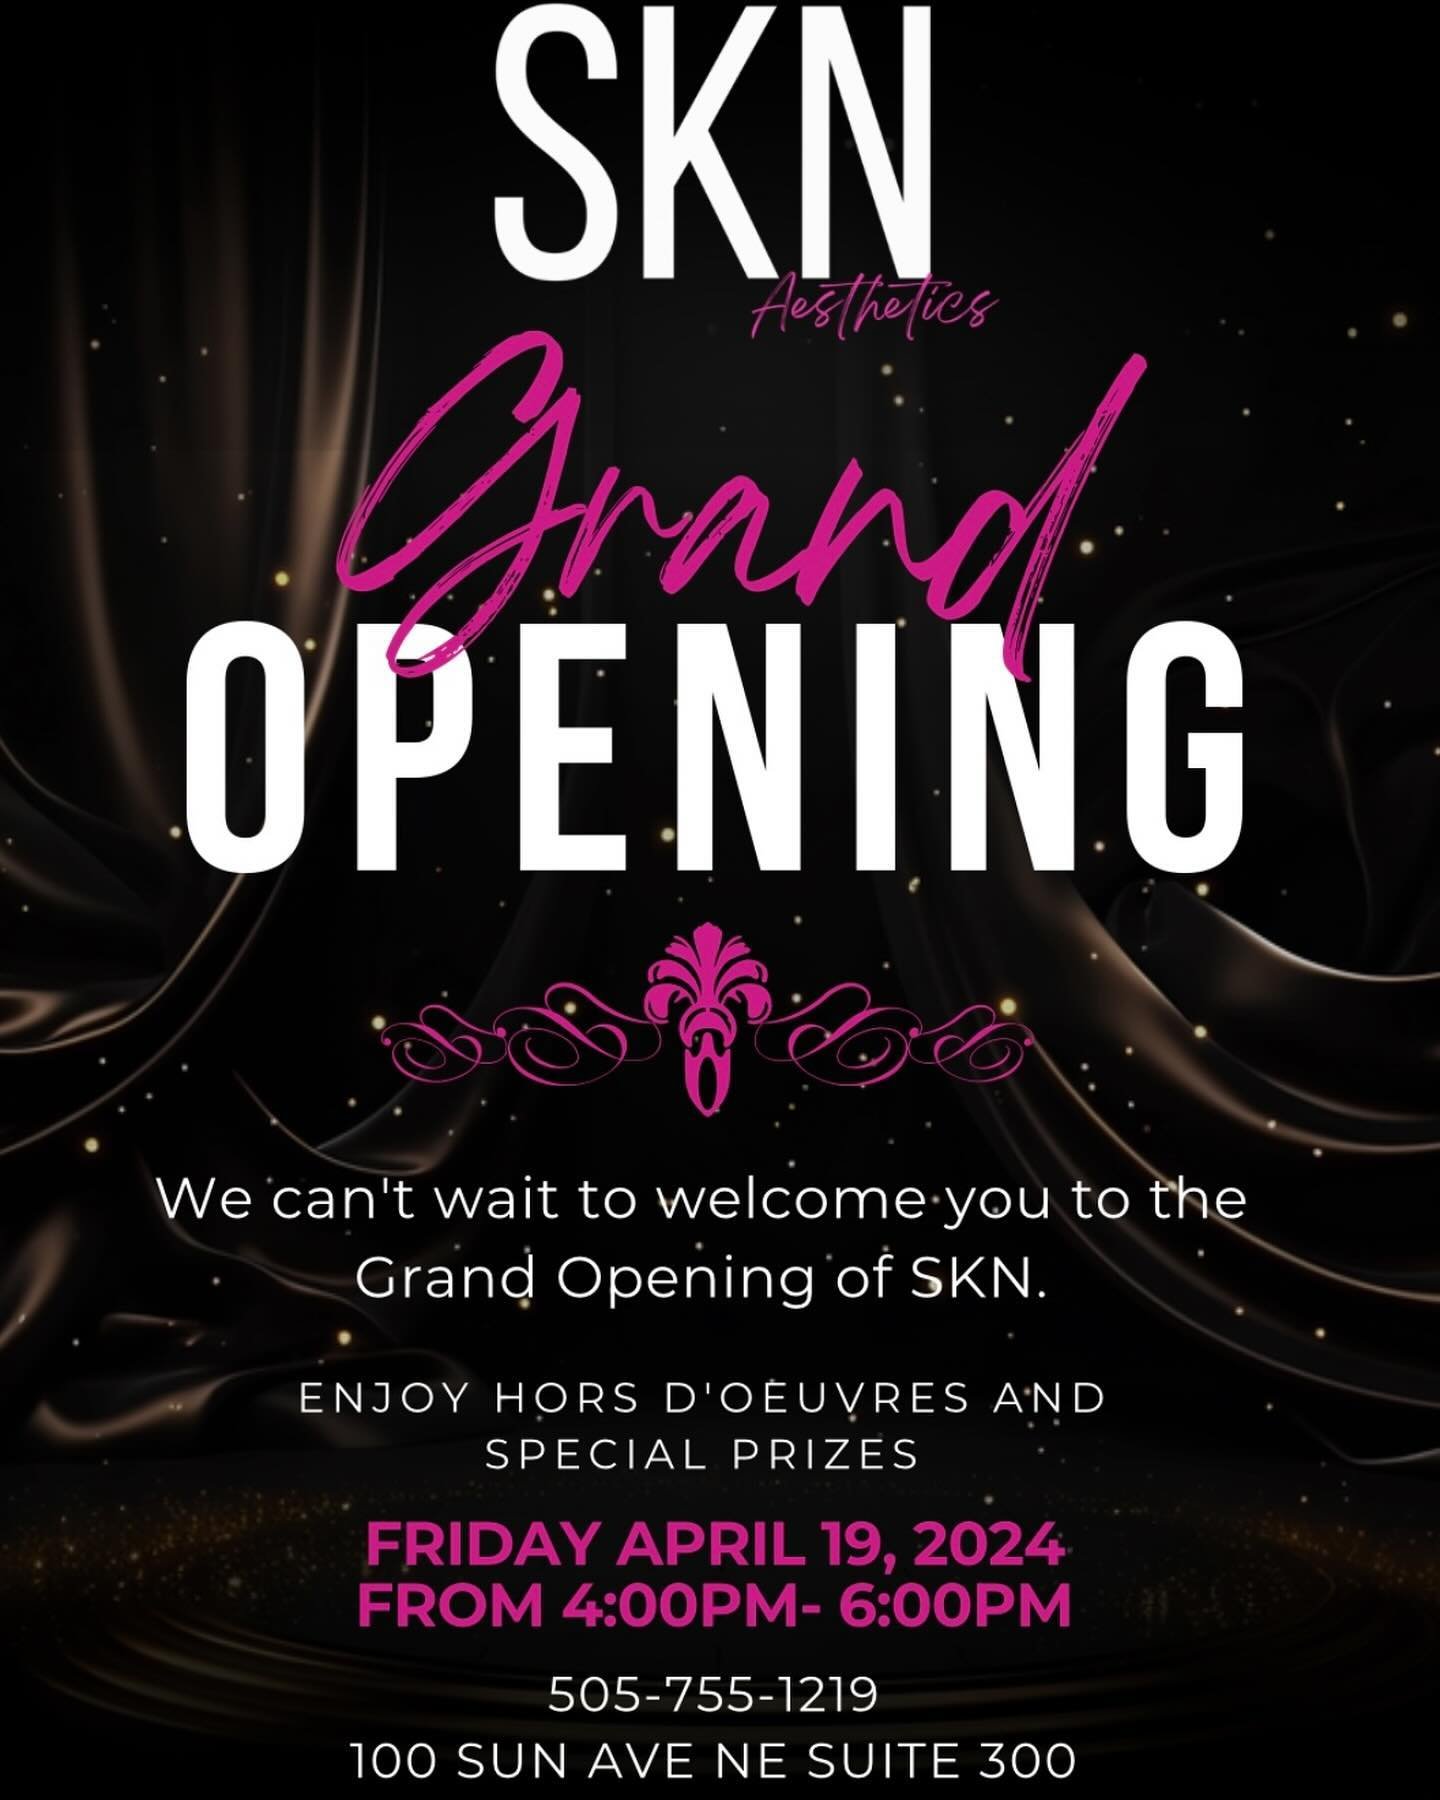 ✨SAVE THE DATE✨

We are so excited to invite you to our grand opening! Join us in introducing SKN Aesthetics and meet our amazing team!